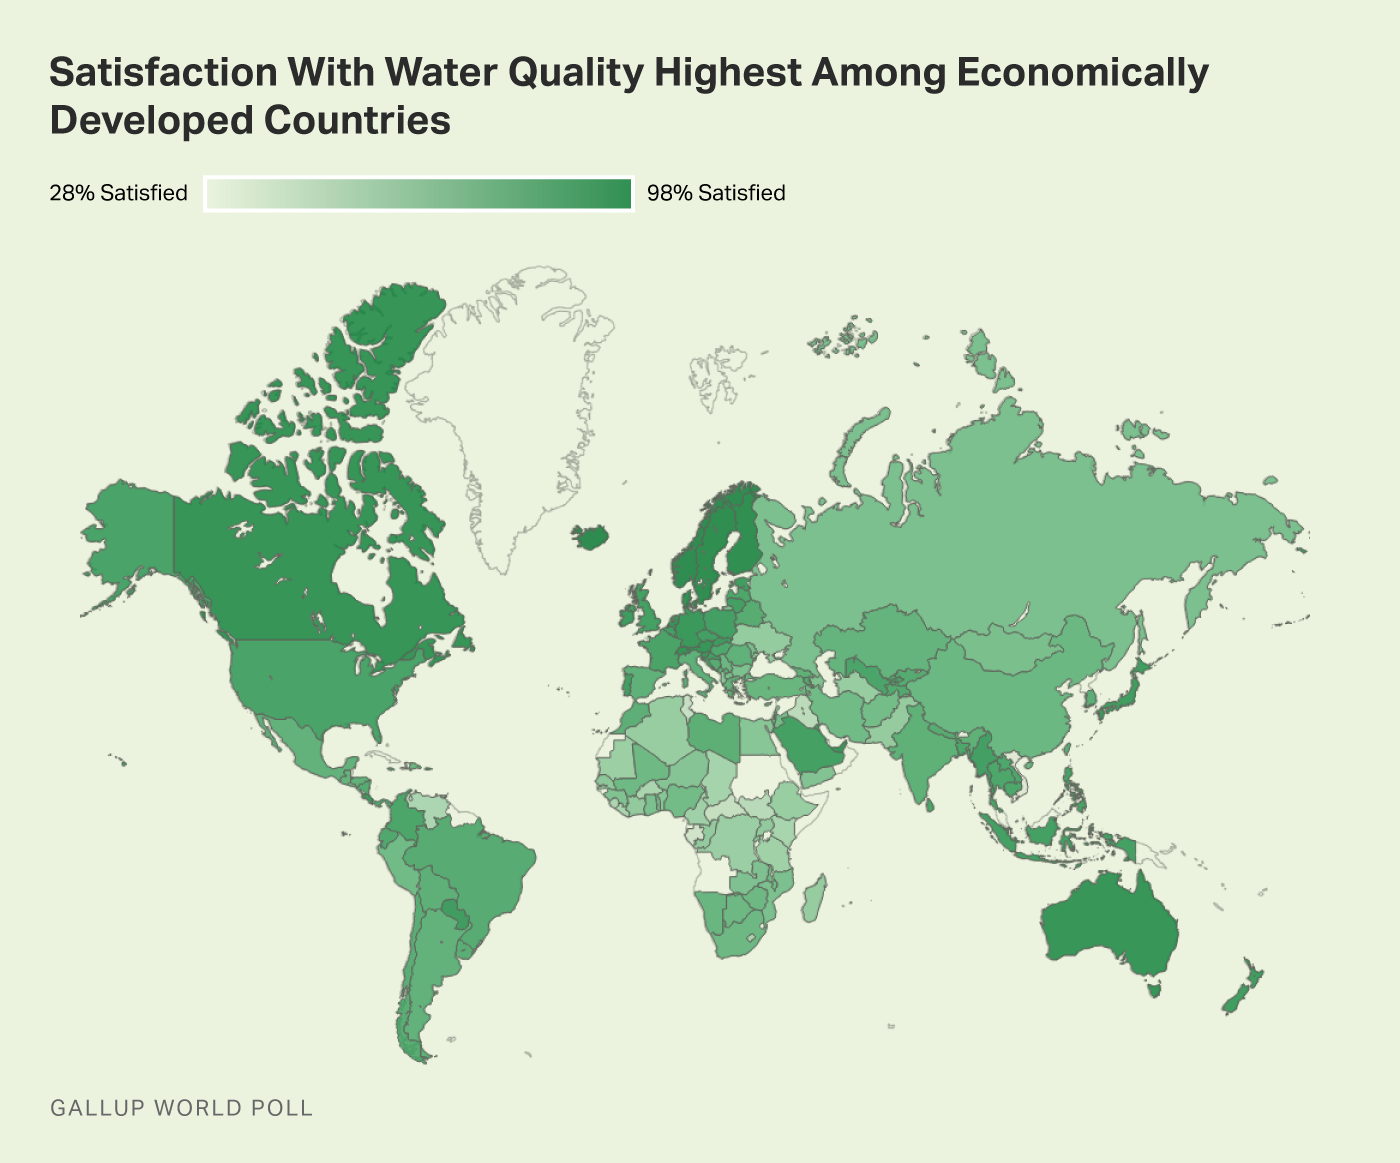 Alt text: Heat map showing the range in satisfaction with water quality by country worldwide.